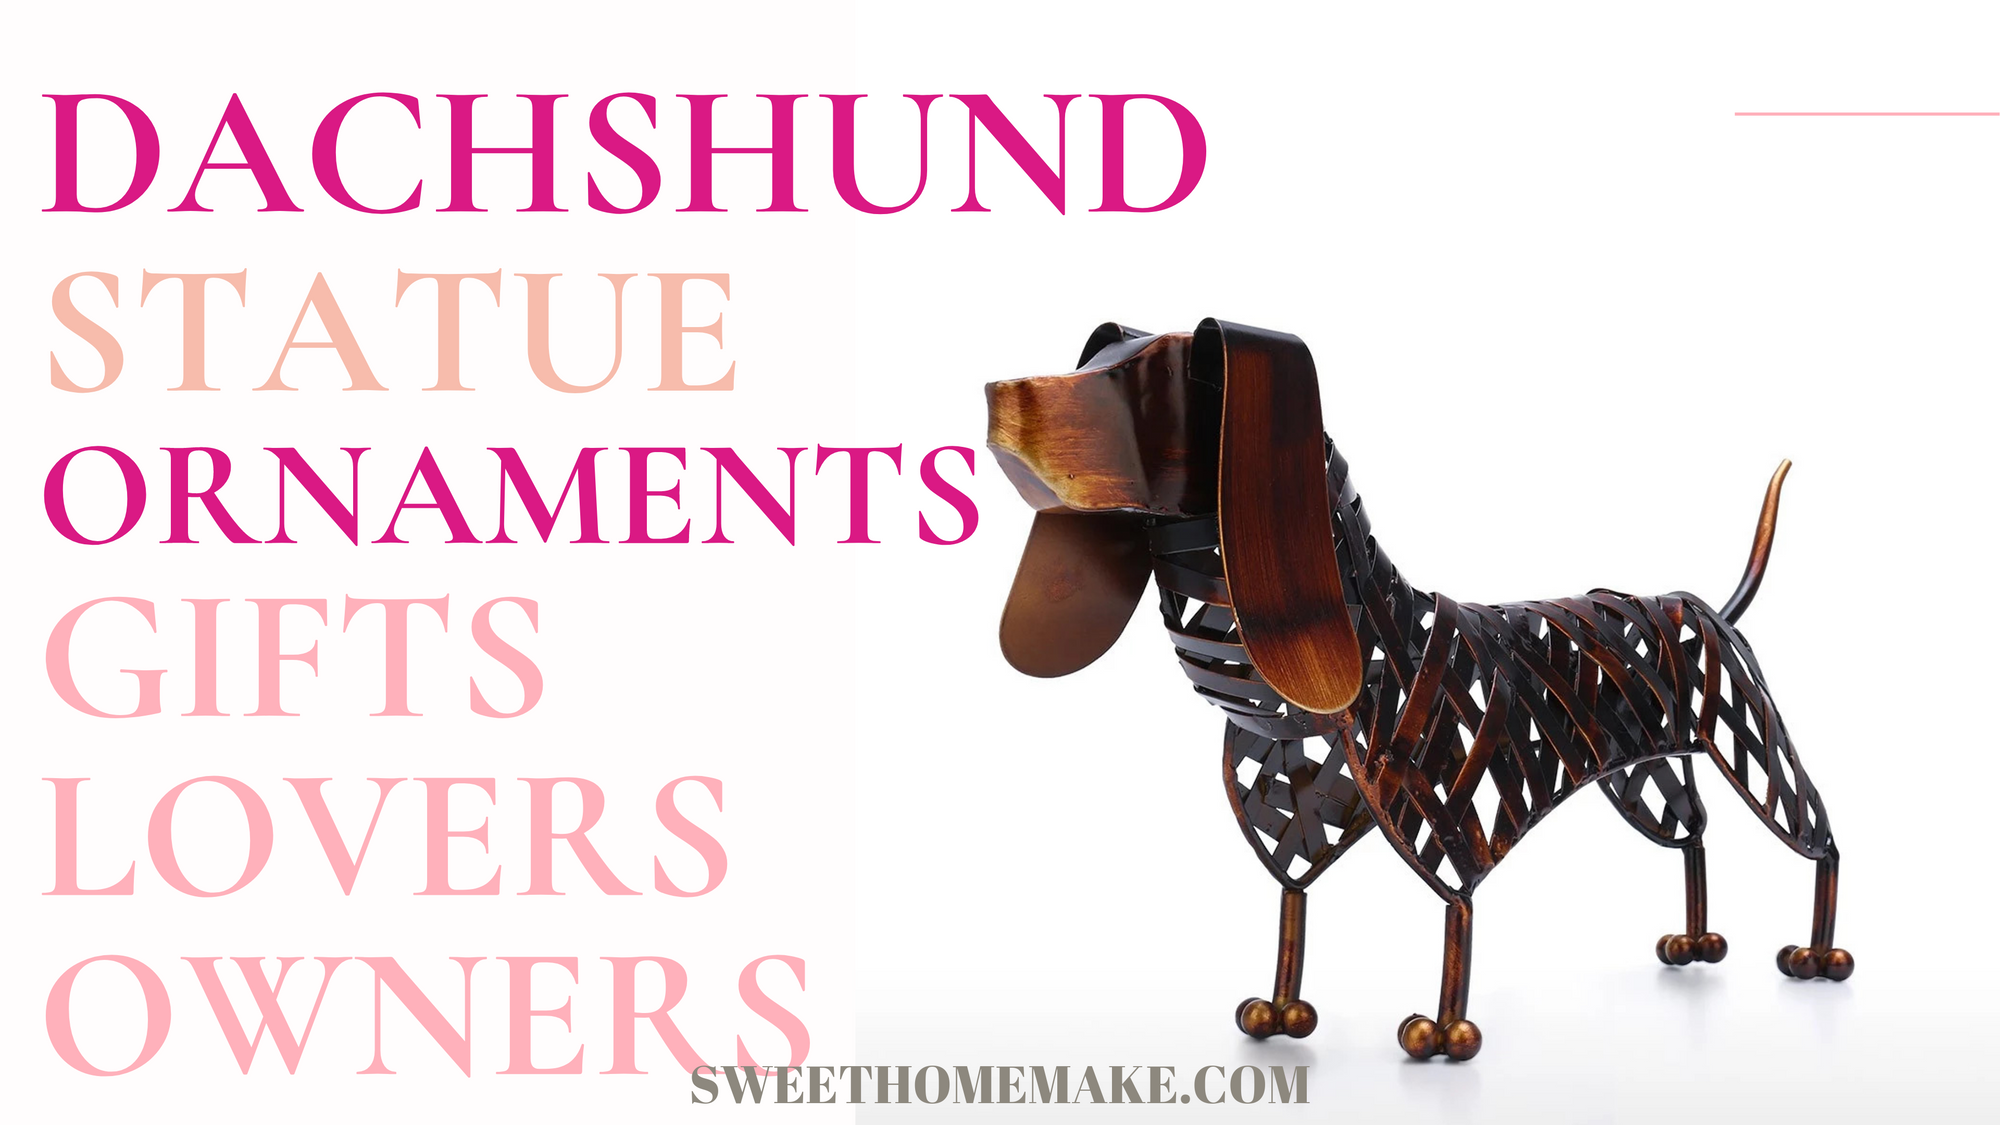 Dachshund Gifts and Ornaments Decor by Dog Statue